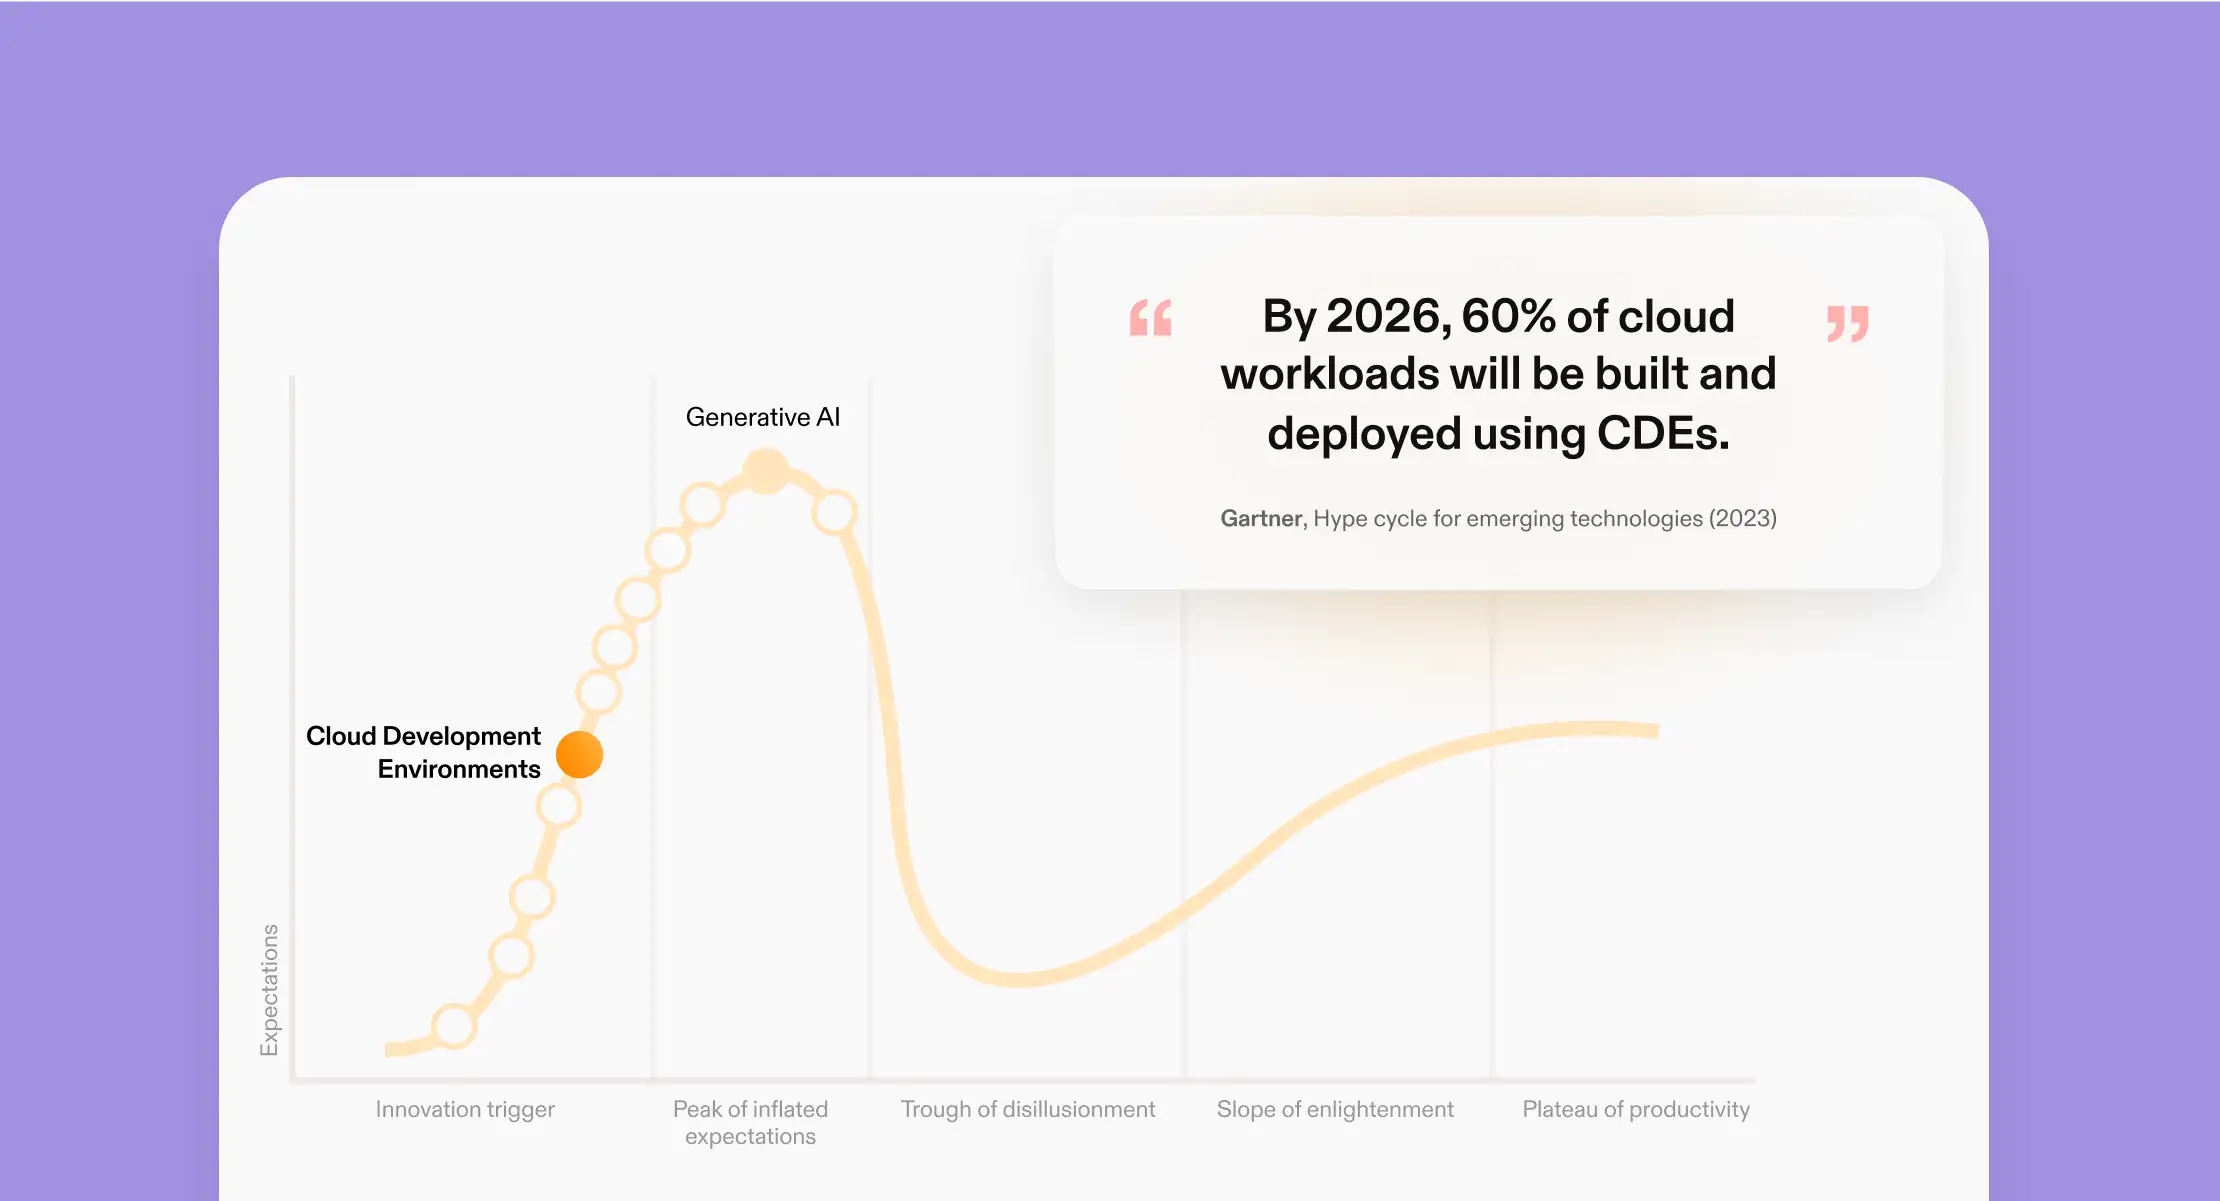 Gartner predicts that 60% of cloud workloads will be built and deployed using CDEs